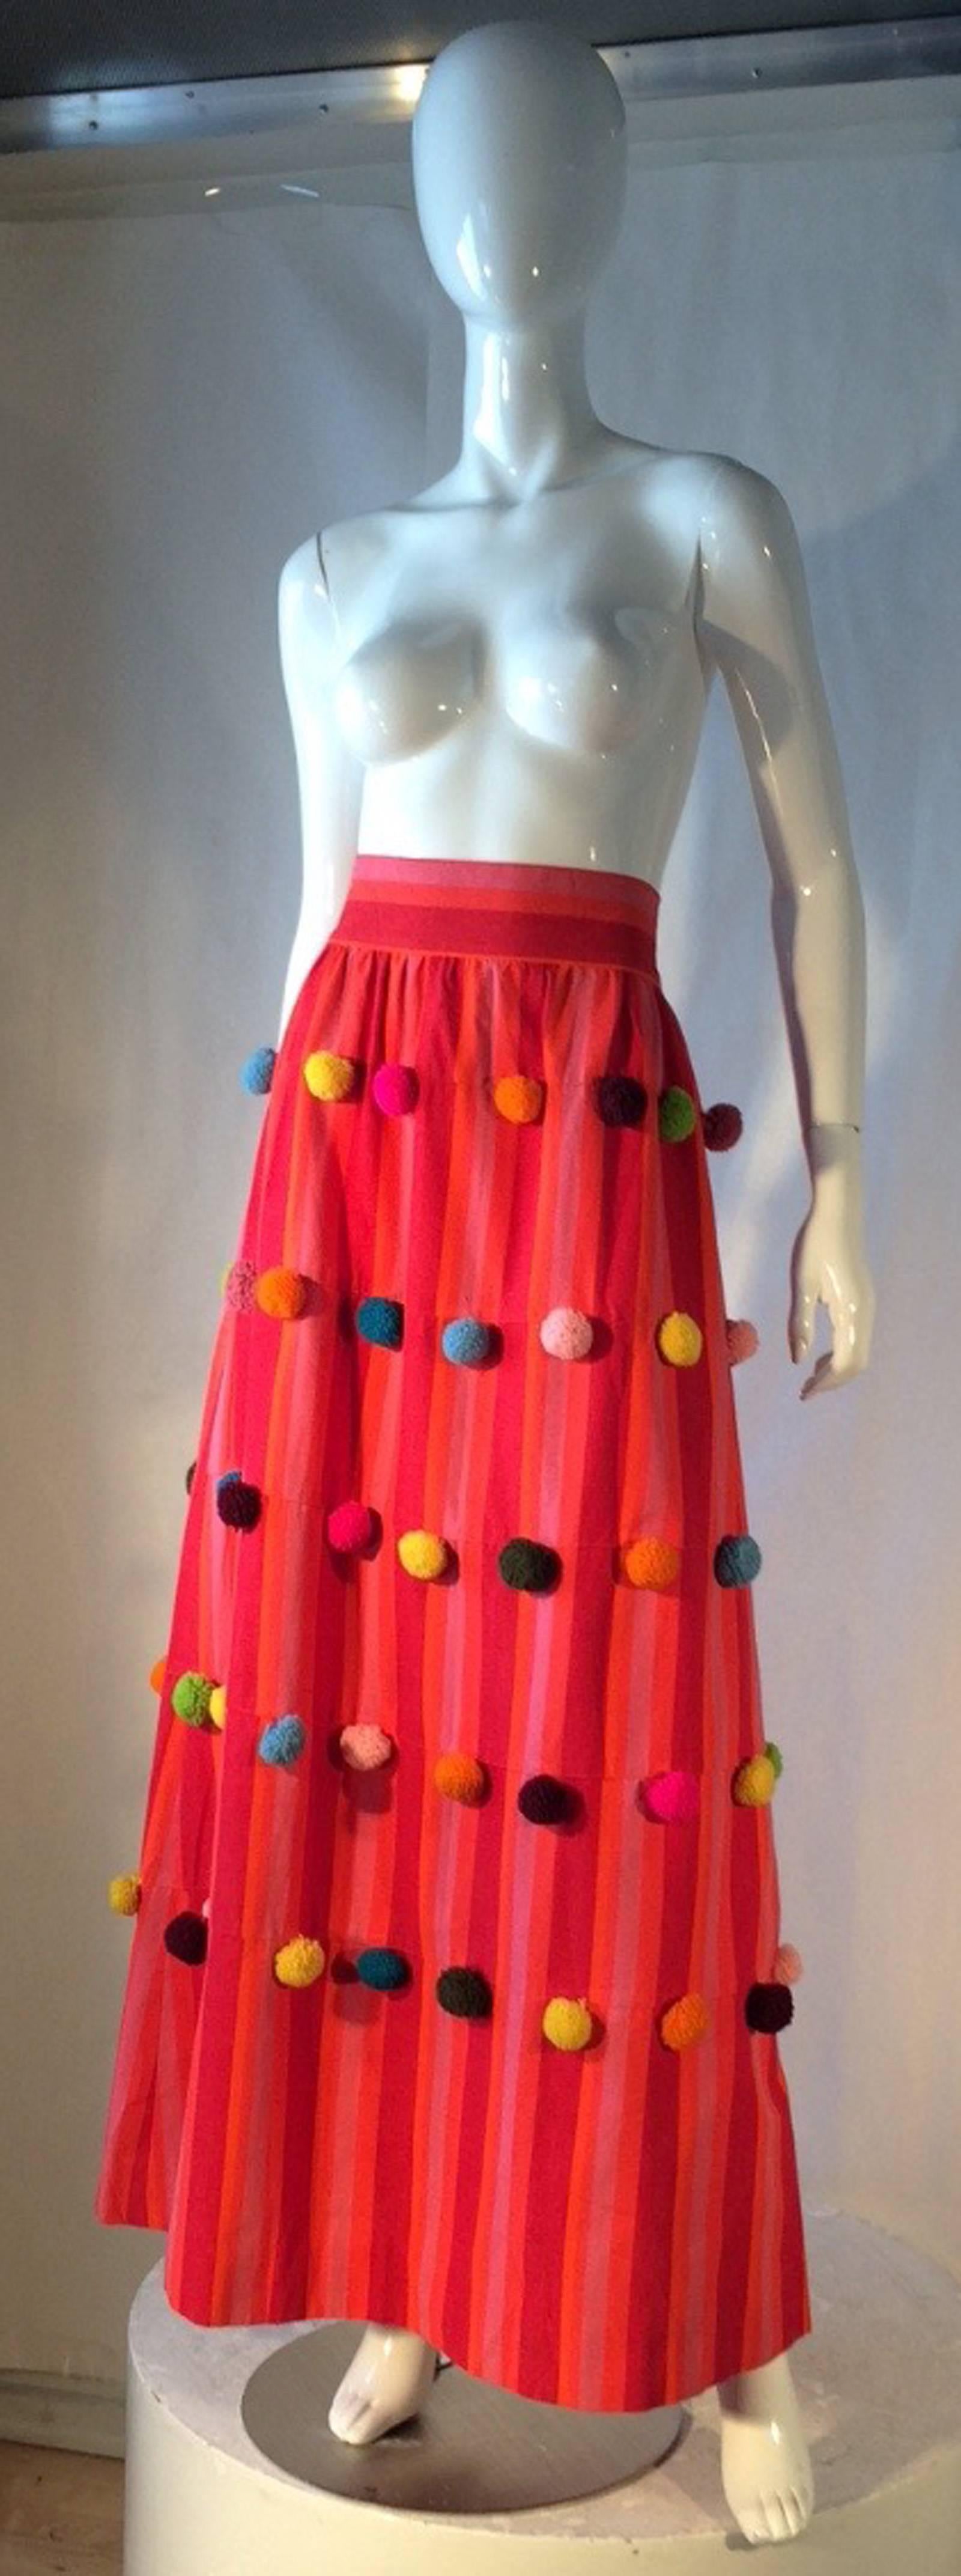 A fine and charming El Palomar maxi skirt. Authentic hand made Mexican pink/orange striped cotton item fully trimmed with multi-color pom poms. item. Item features a matching fabric waist band, original metal zipper. with a 68